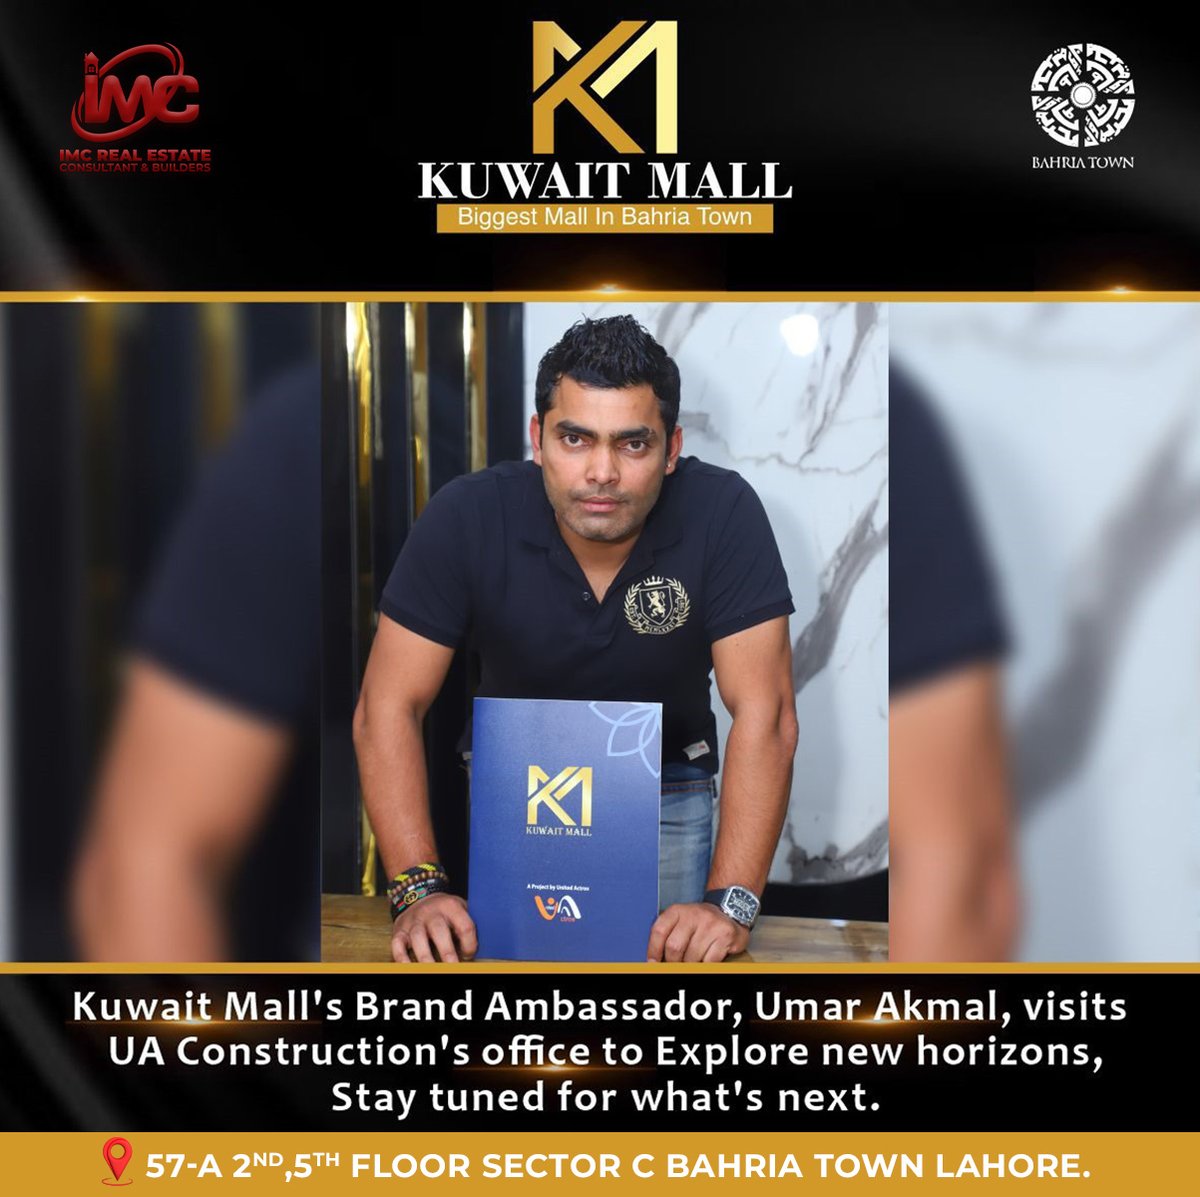 Kuwait Mall's brand ambassador, Umar Akmal, visits UA Construction's office to explore new horizons, Stay tuned for what's next.